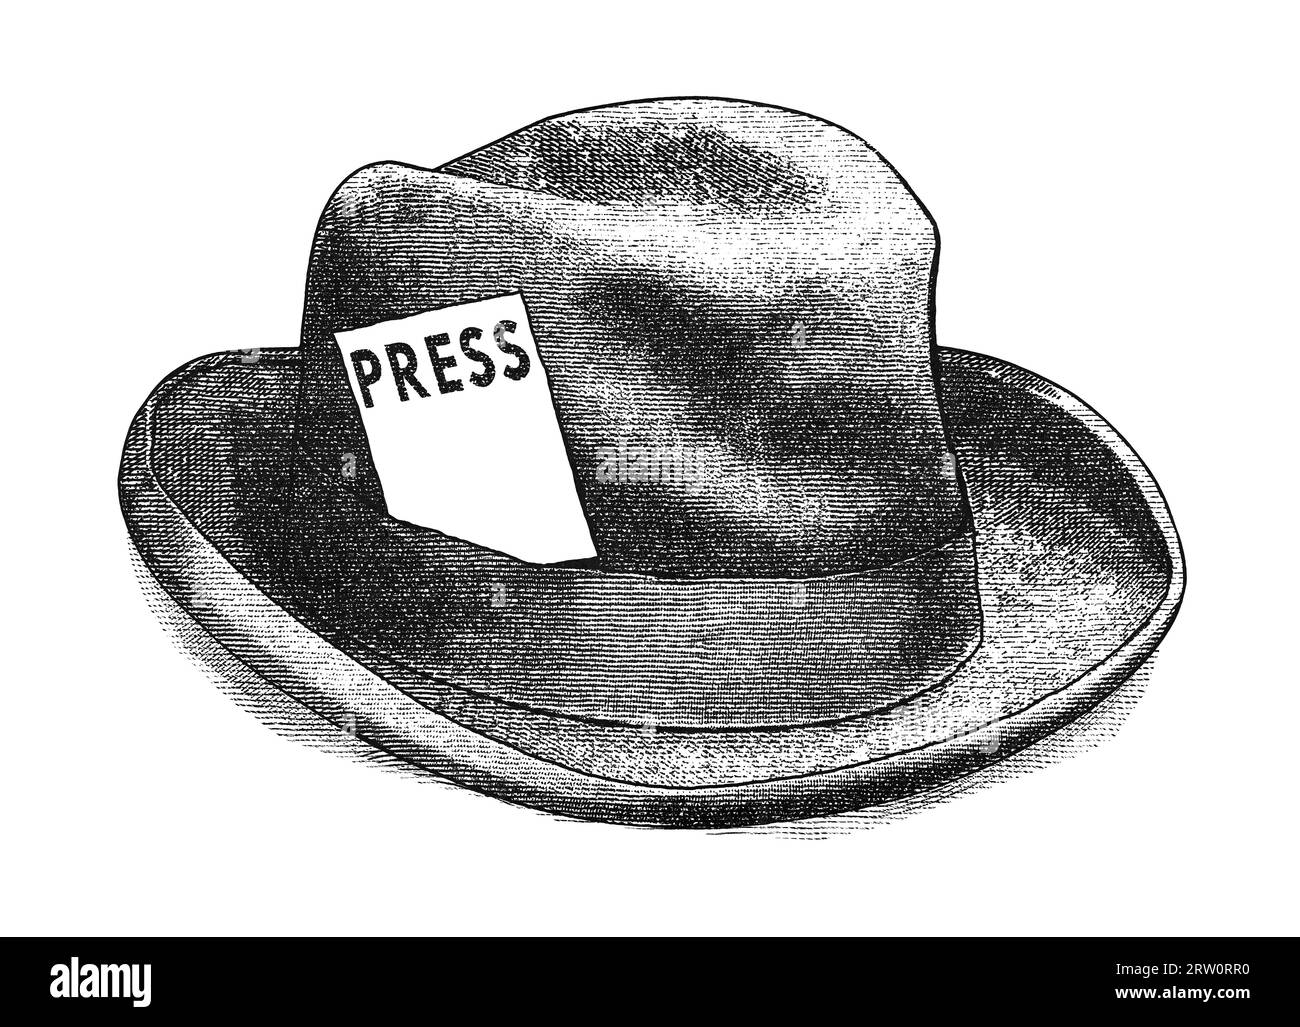 Original digital illustration of a fedora hat with press card, in style of old engravings Stock Photo